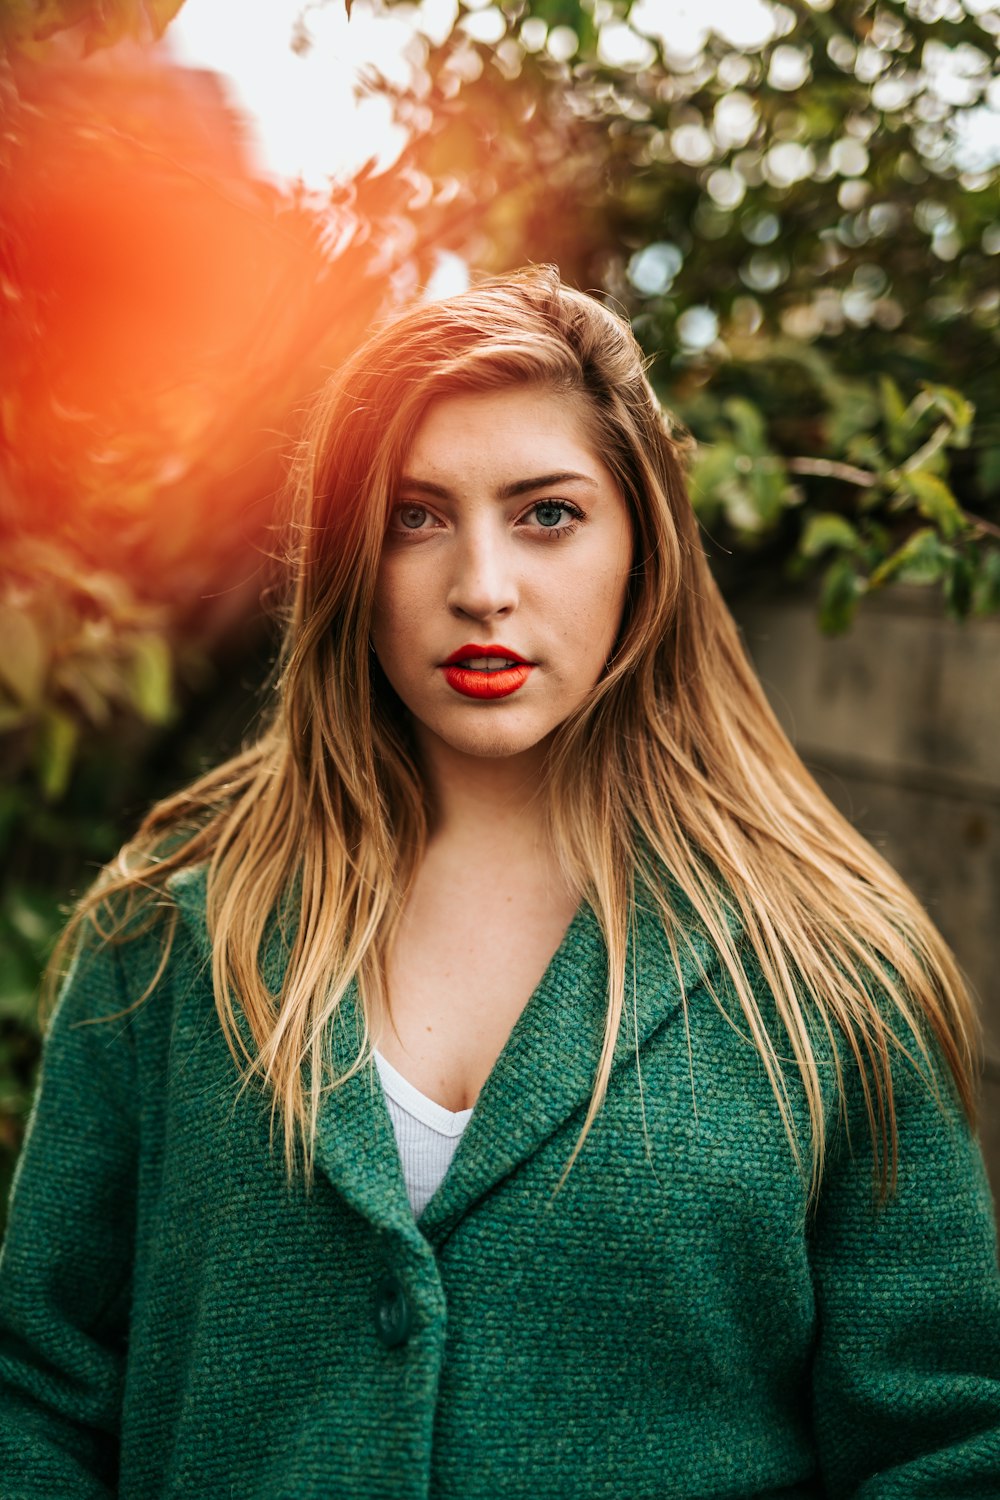 portrait photography of woman in green coat